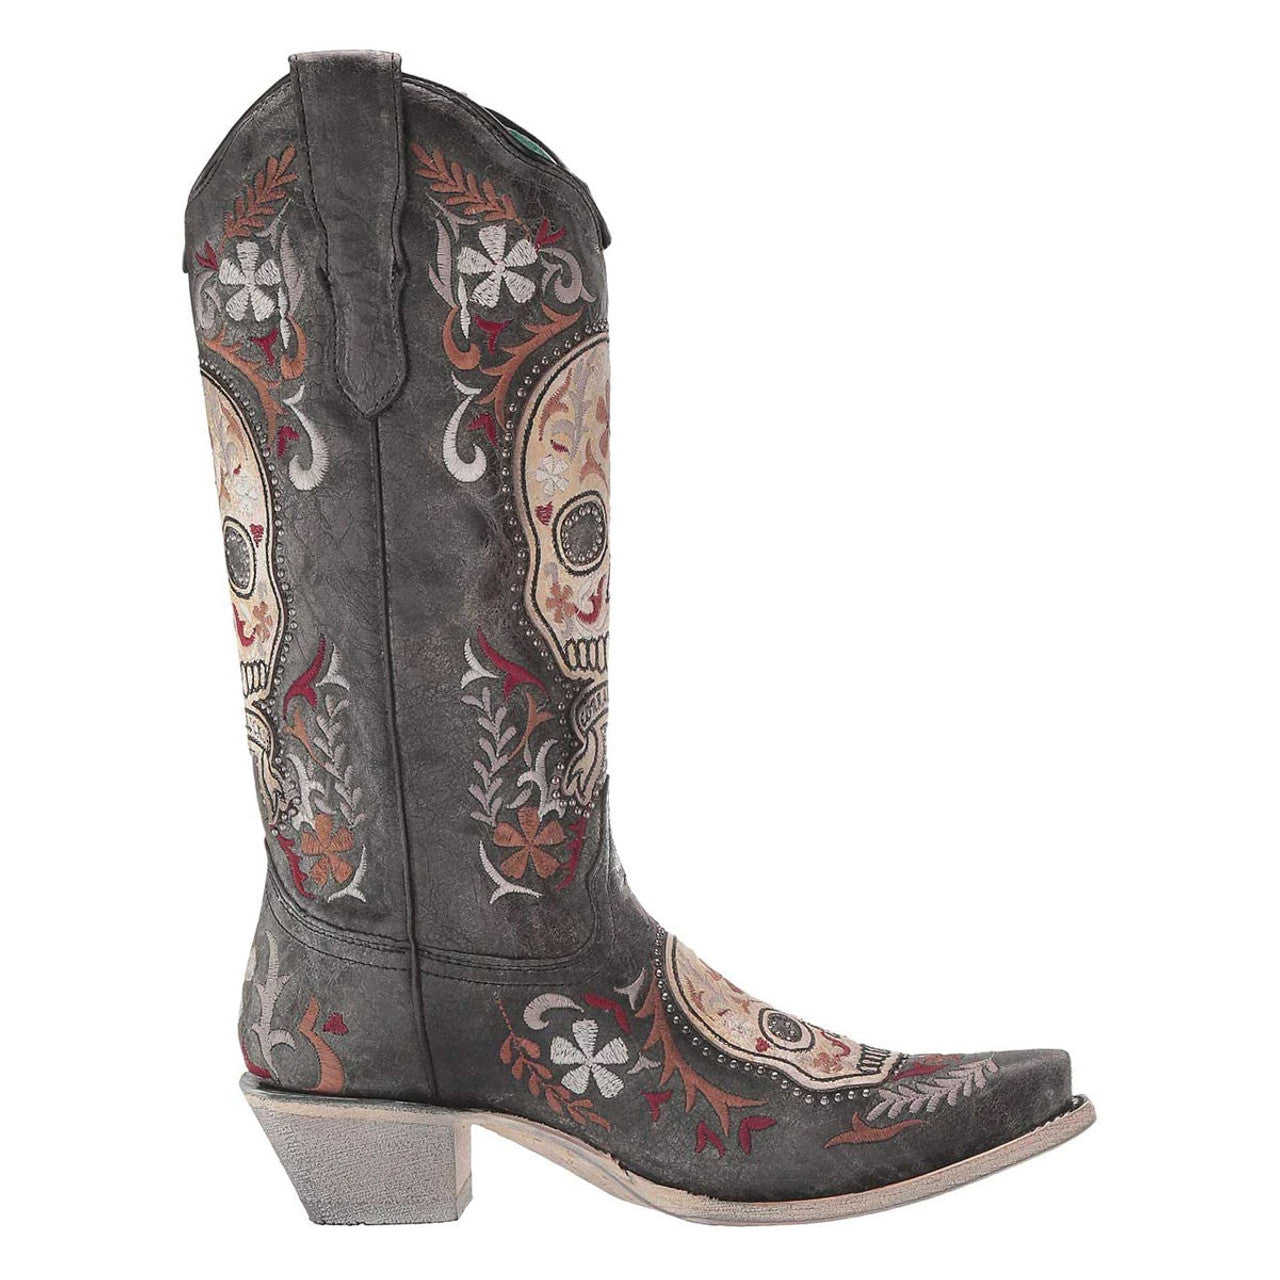 Corral Ladies Black Skull Overlay Embroidery & Studs Boots E1587